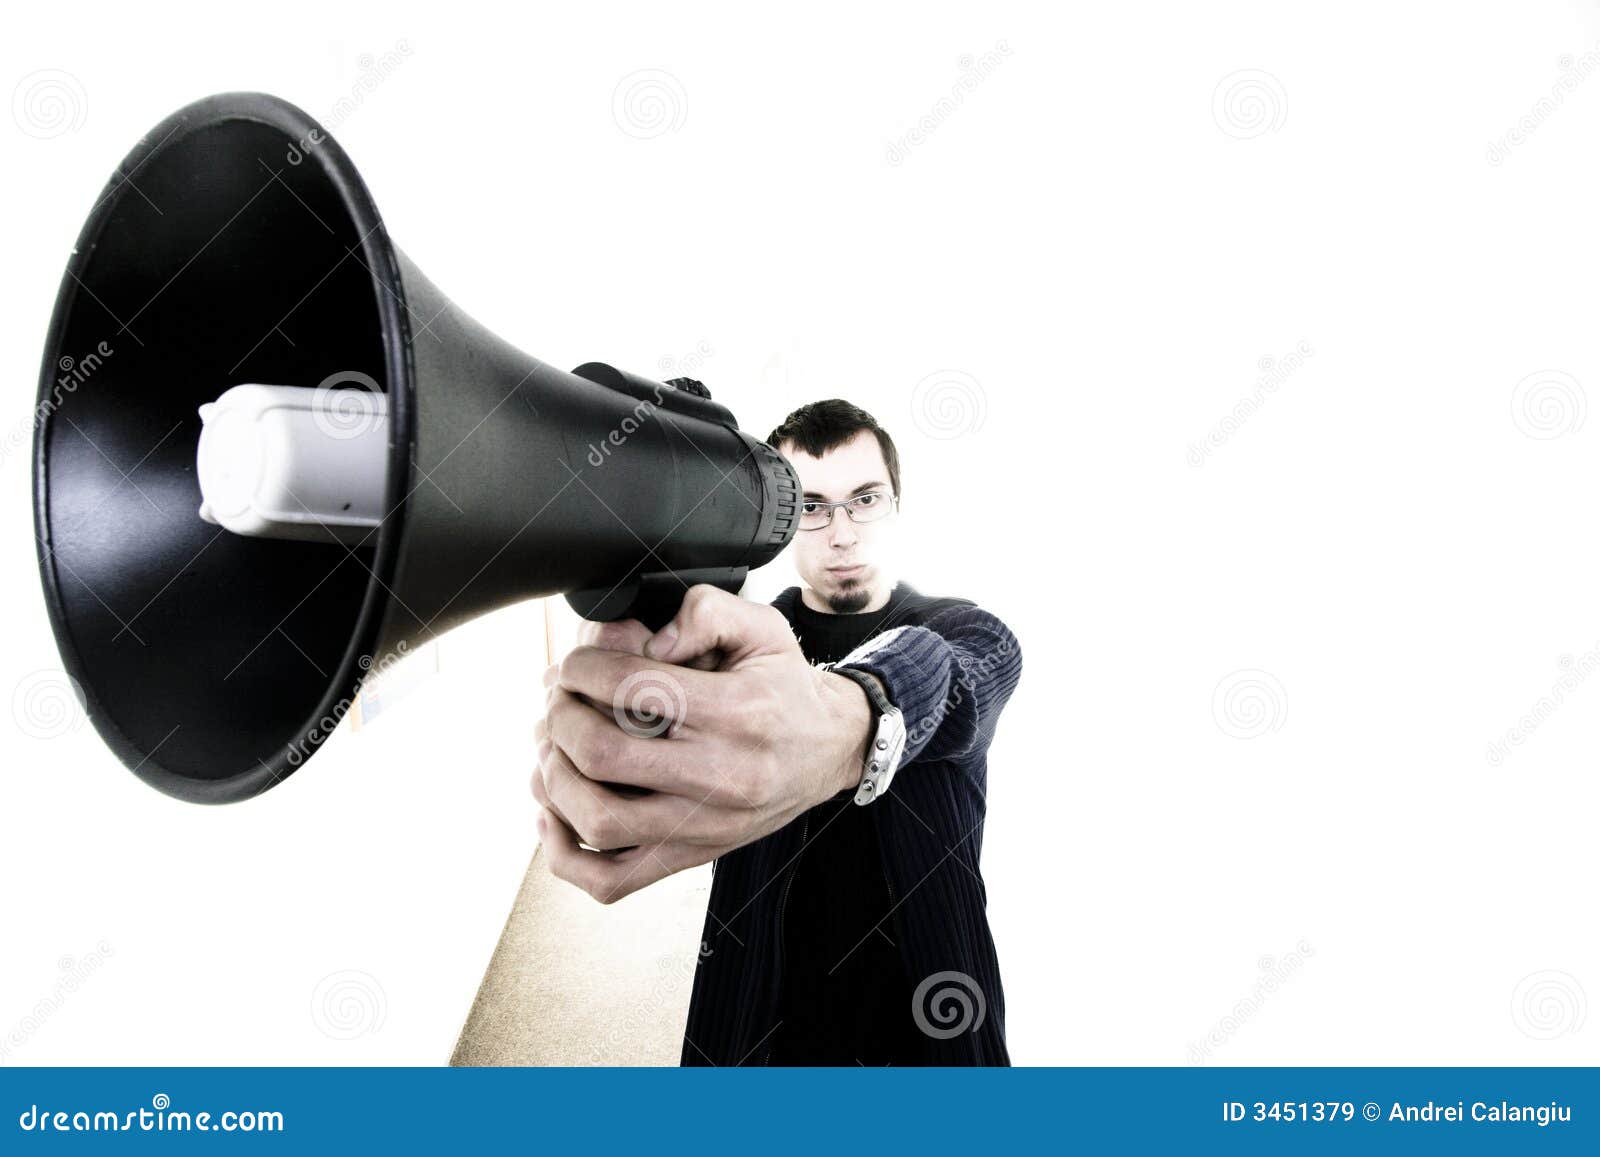 person with loudspeaker